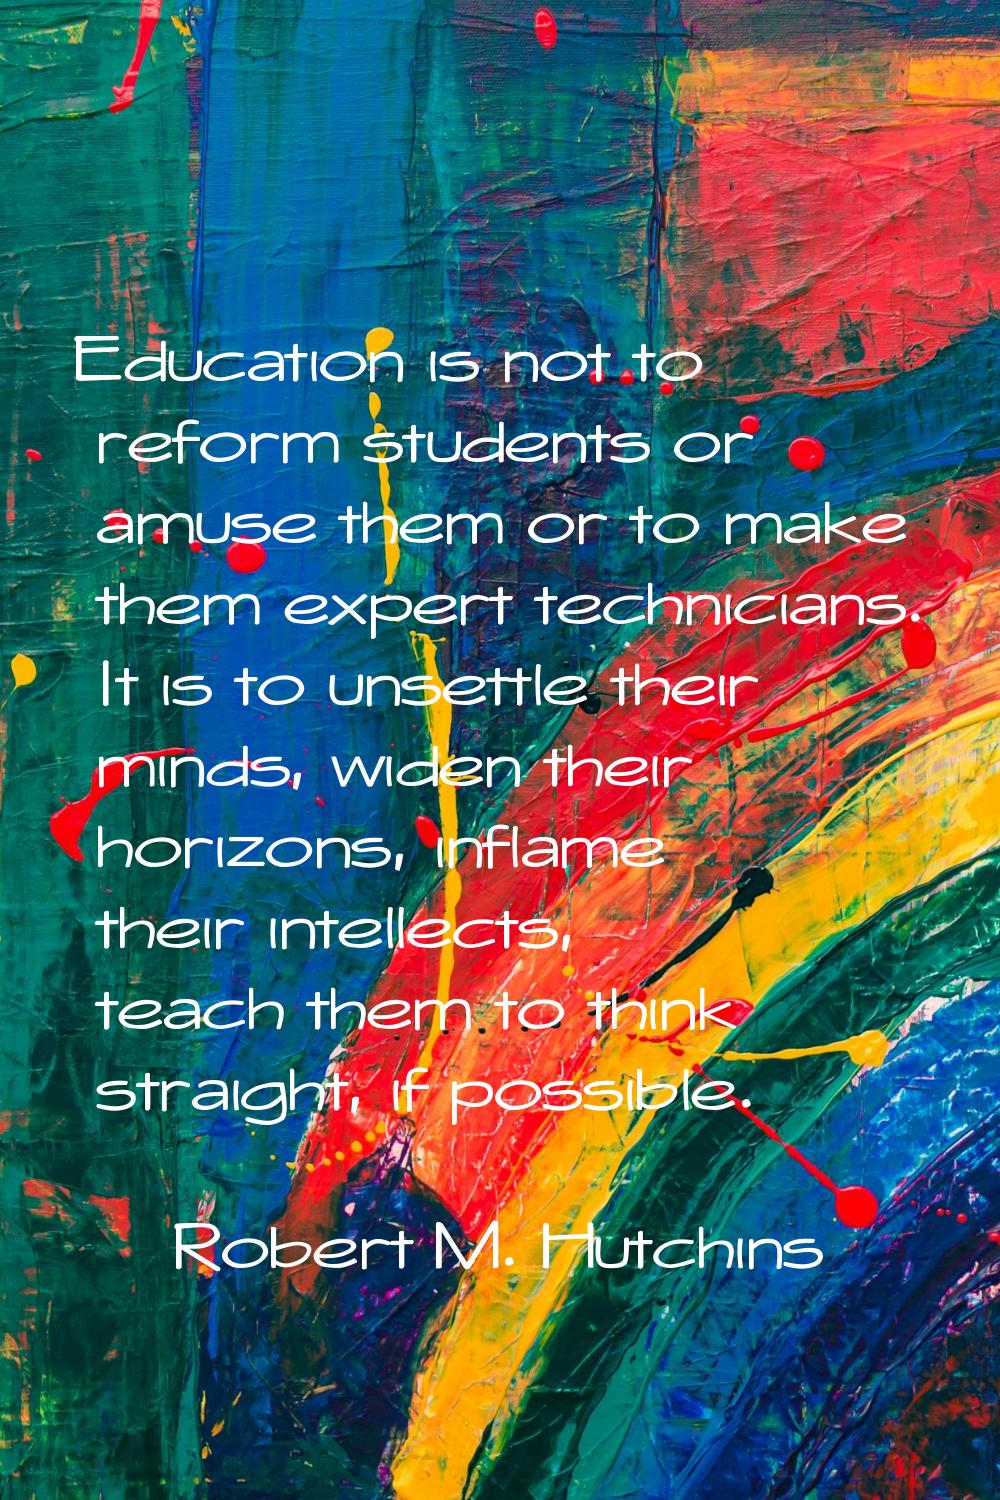 Education is not to reform students or amuse them or to make them expert technicians. It is to unse